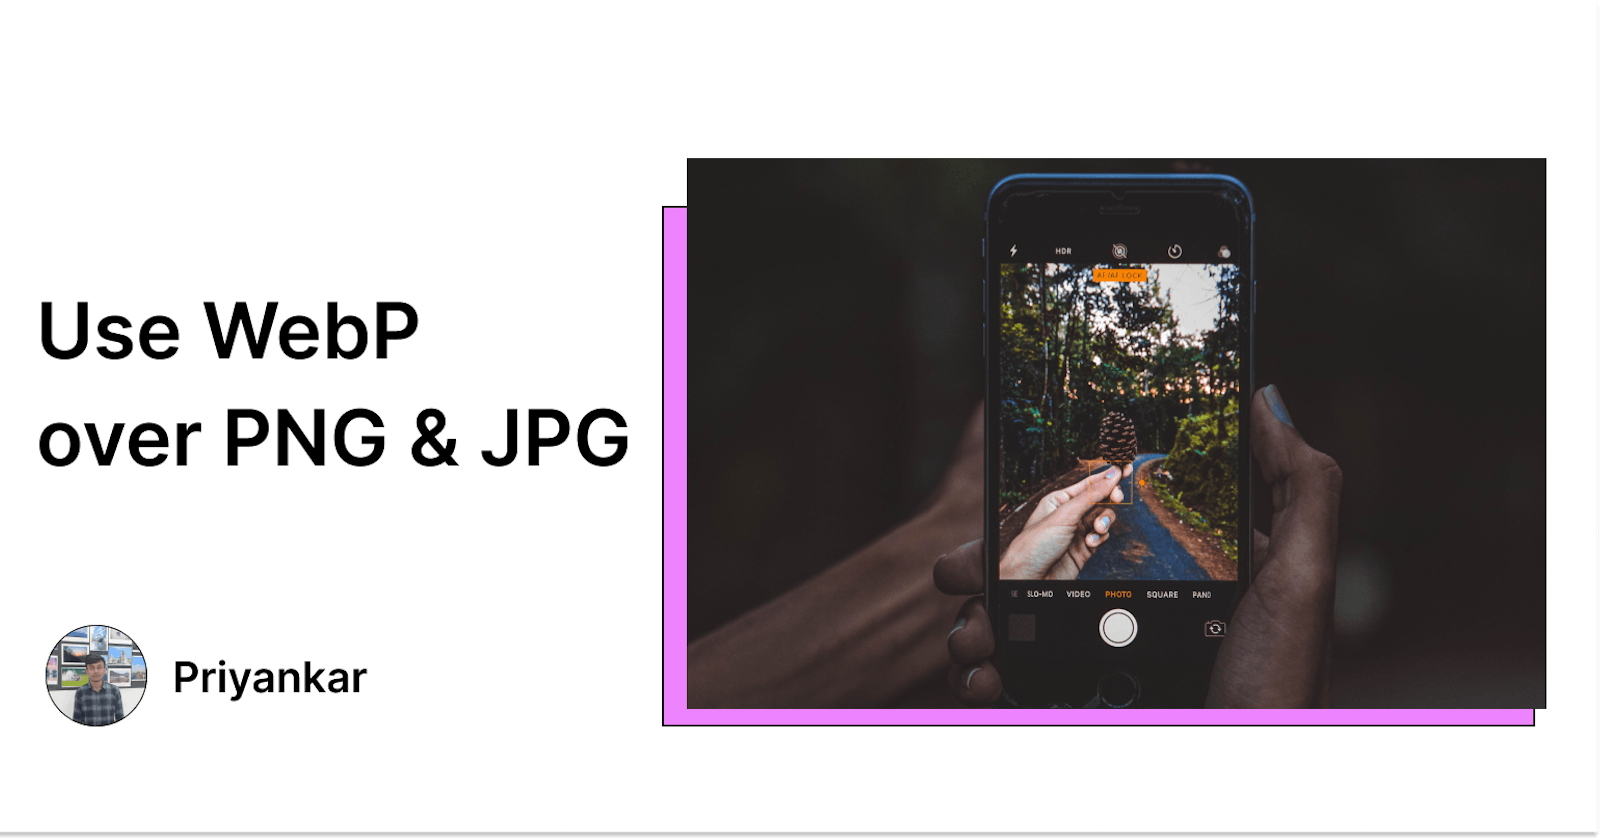 Why should we use a Webp image instead of PNG or JPG?